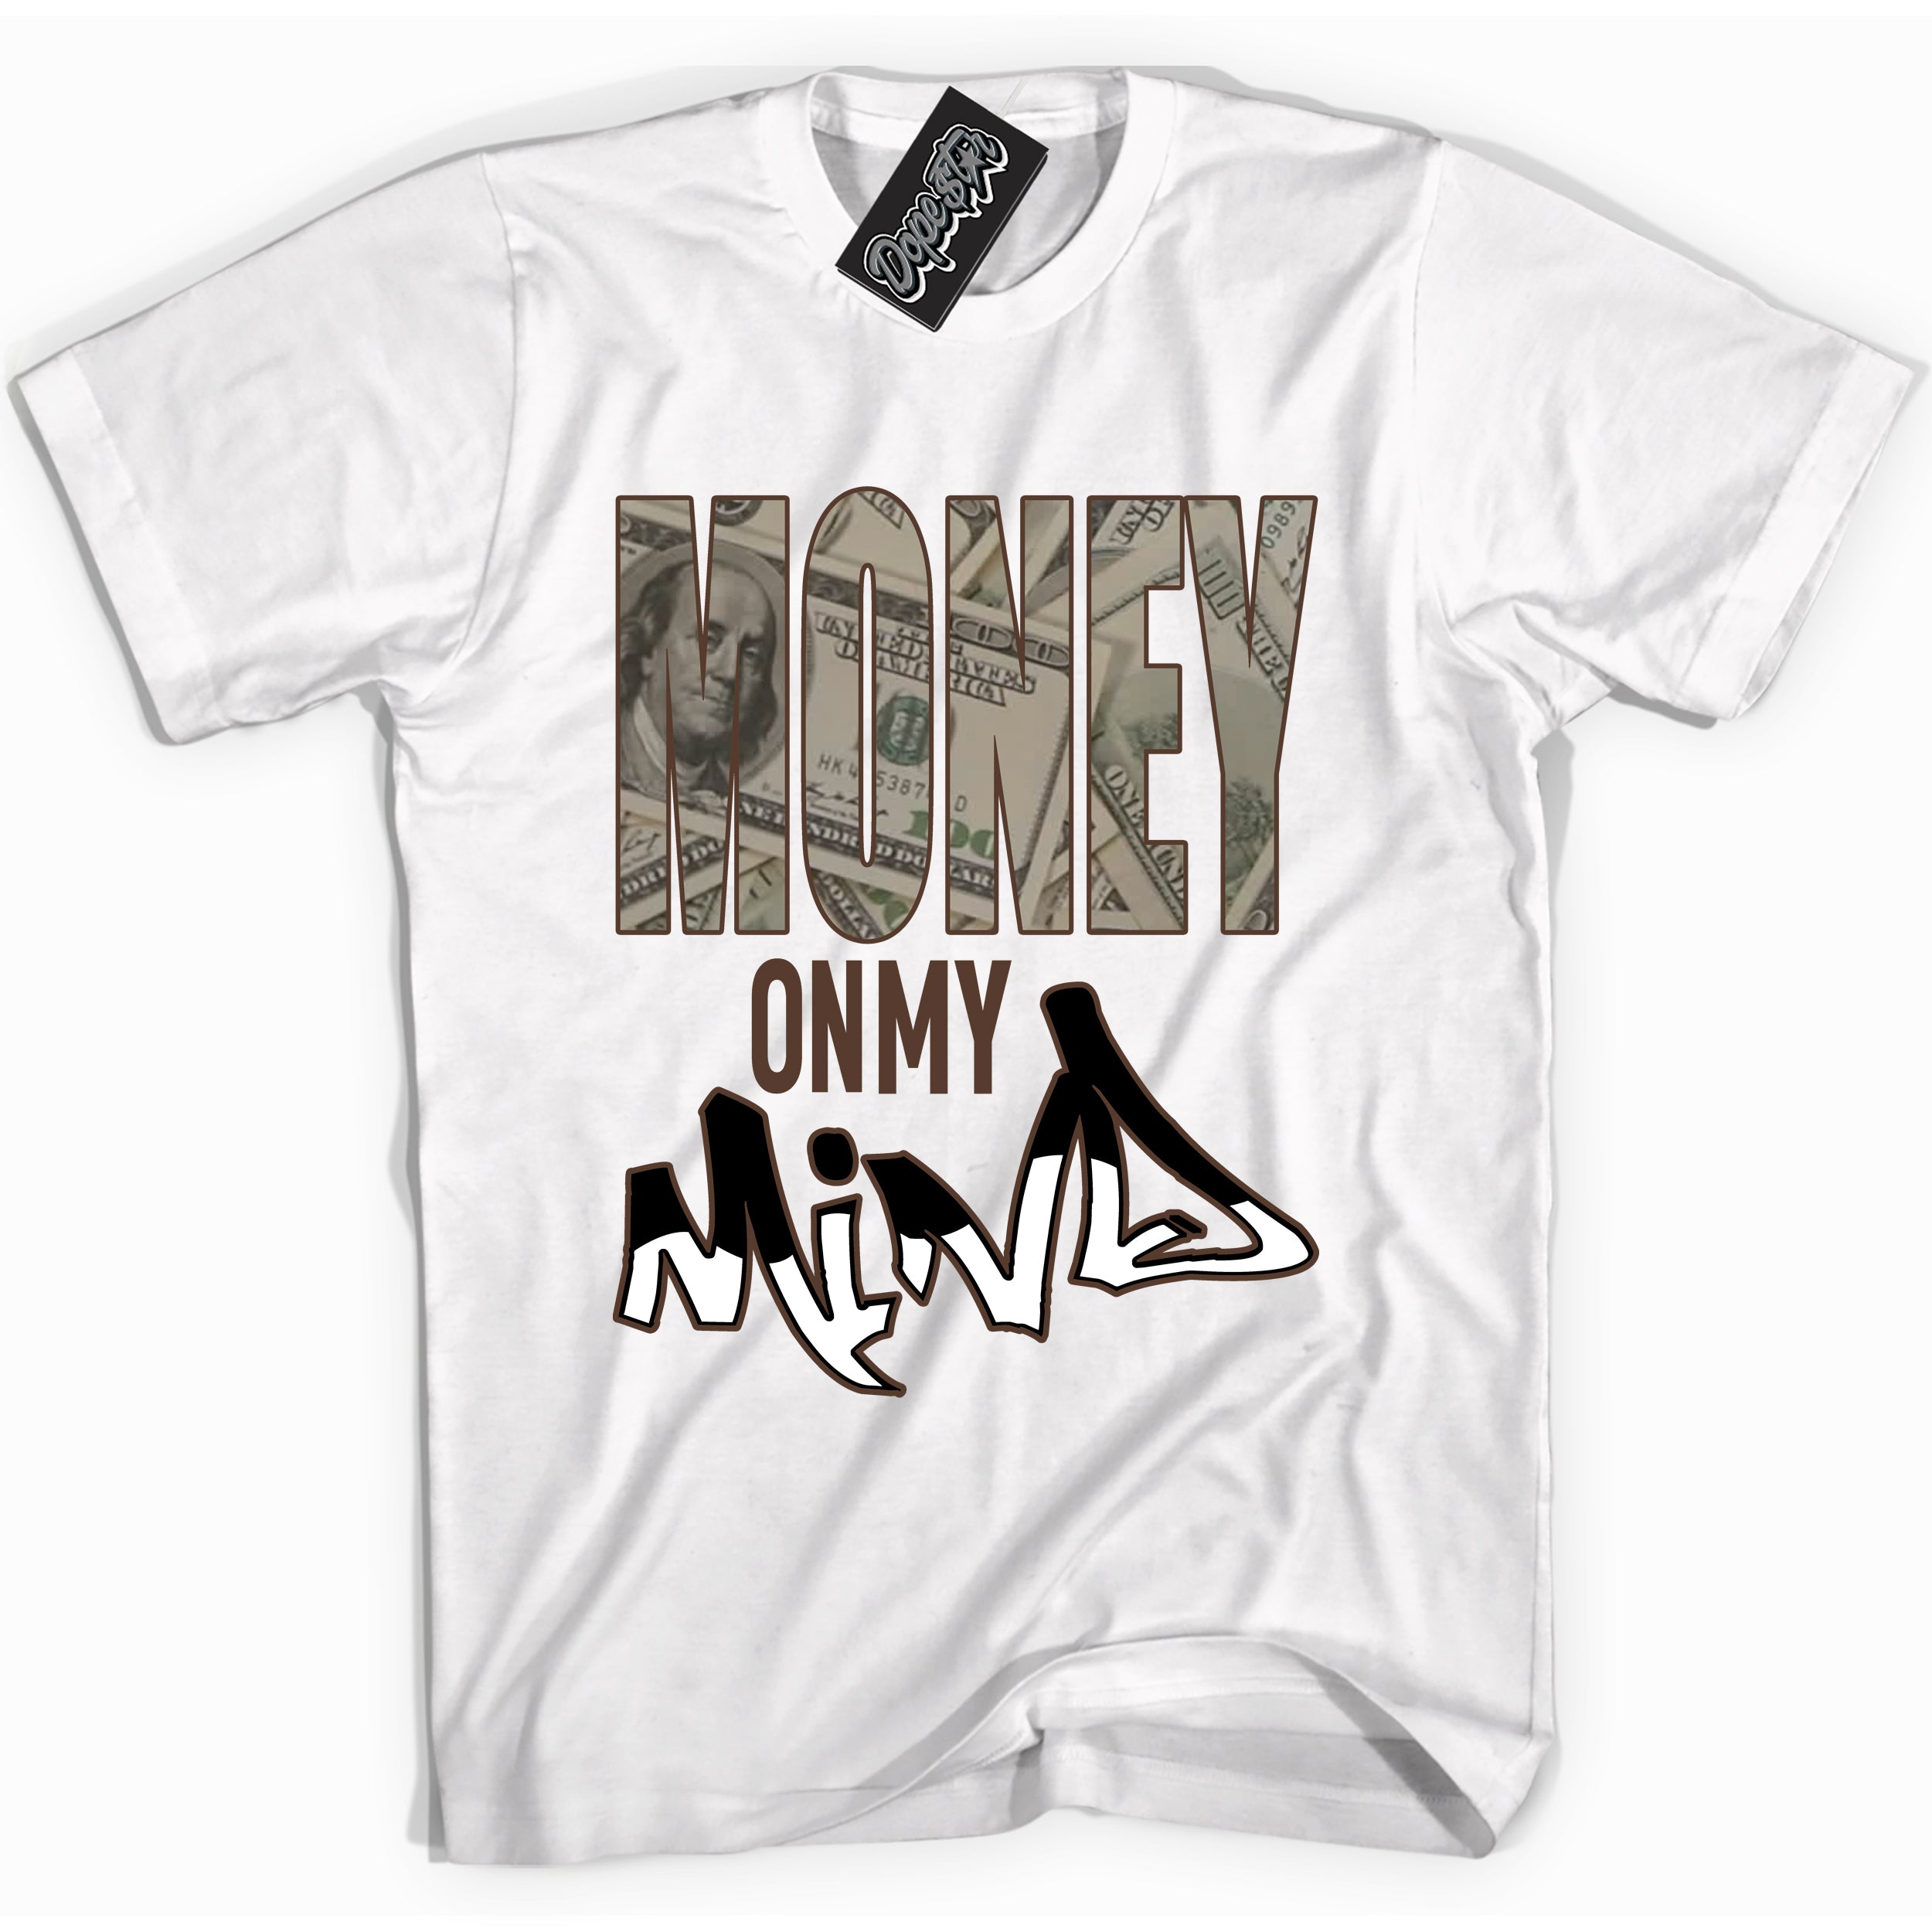 Cool White graphic tee with “ Money On My Mind ” design, that perfectly matches Palomino 1s sneakers 